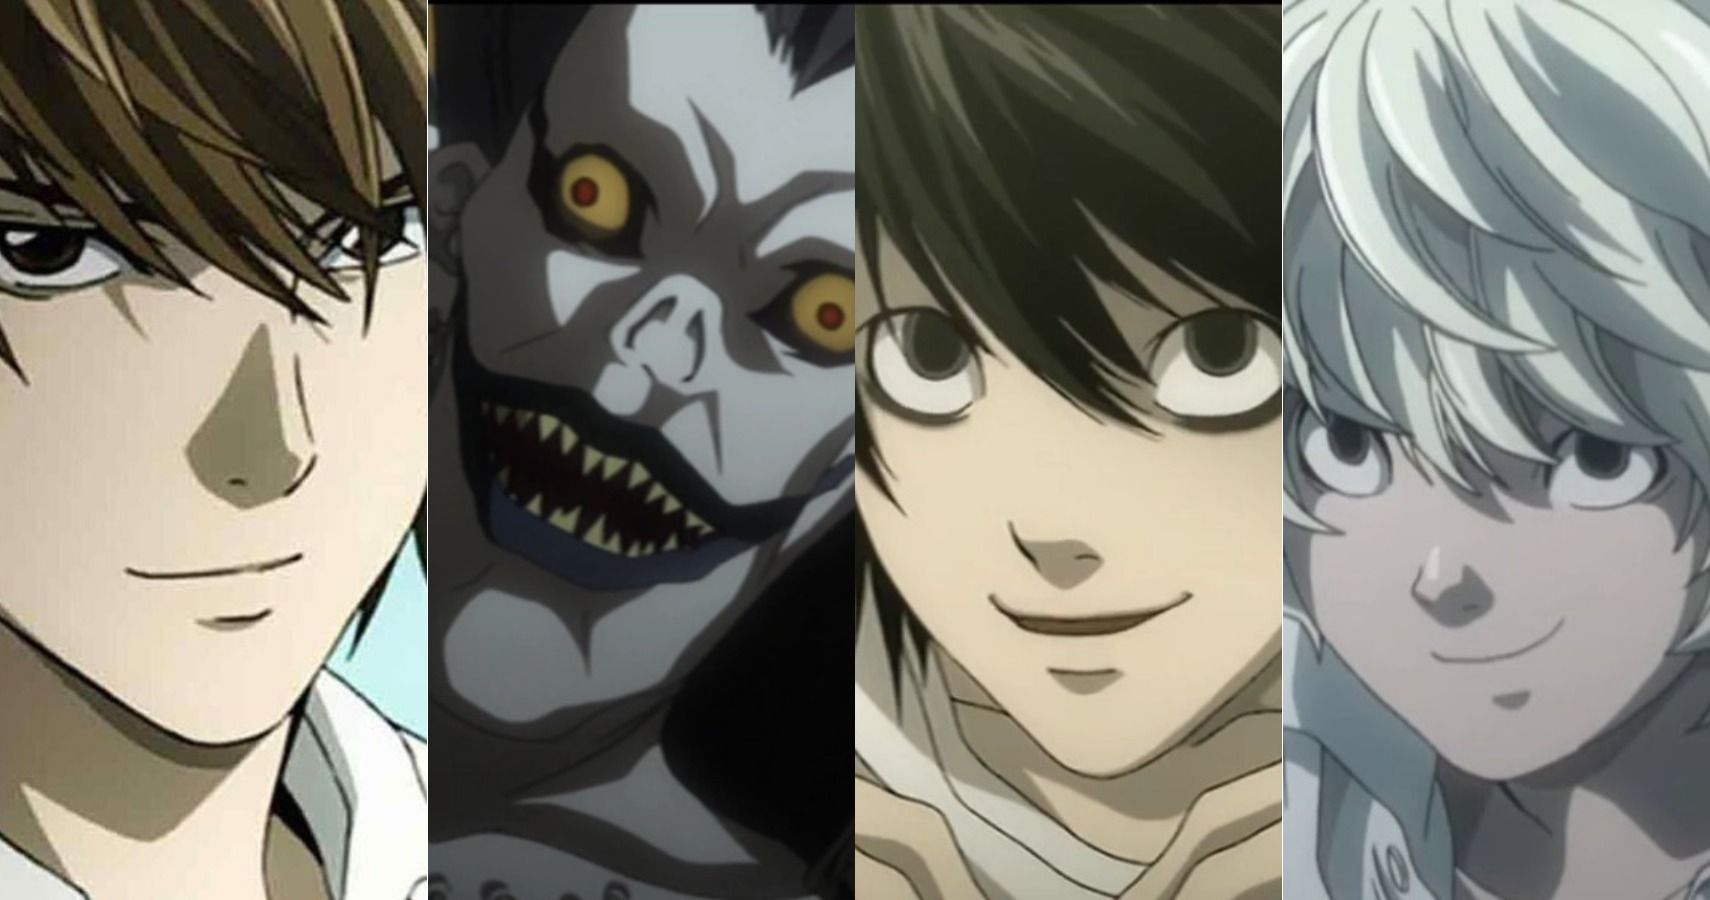 DeathNote- Anime Review. If you ask an anime fan, said to be…